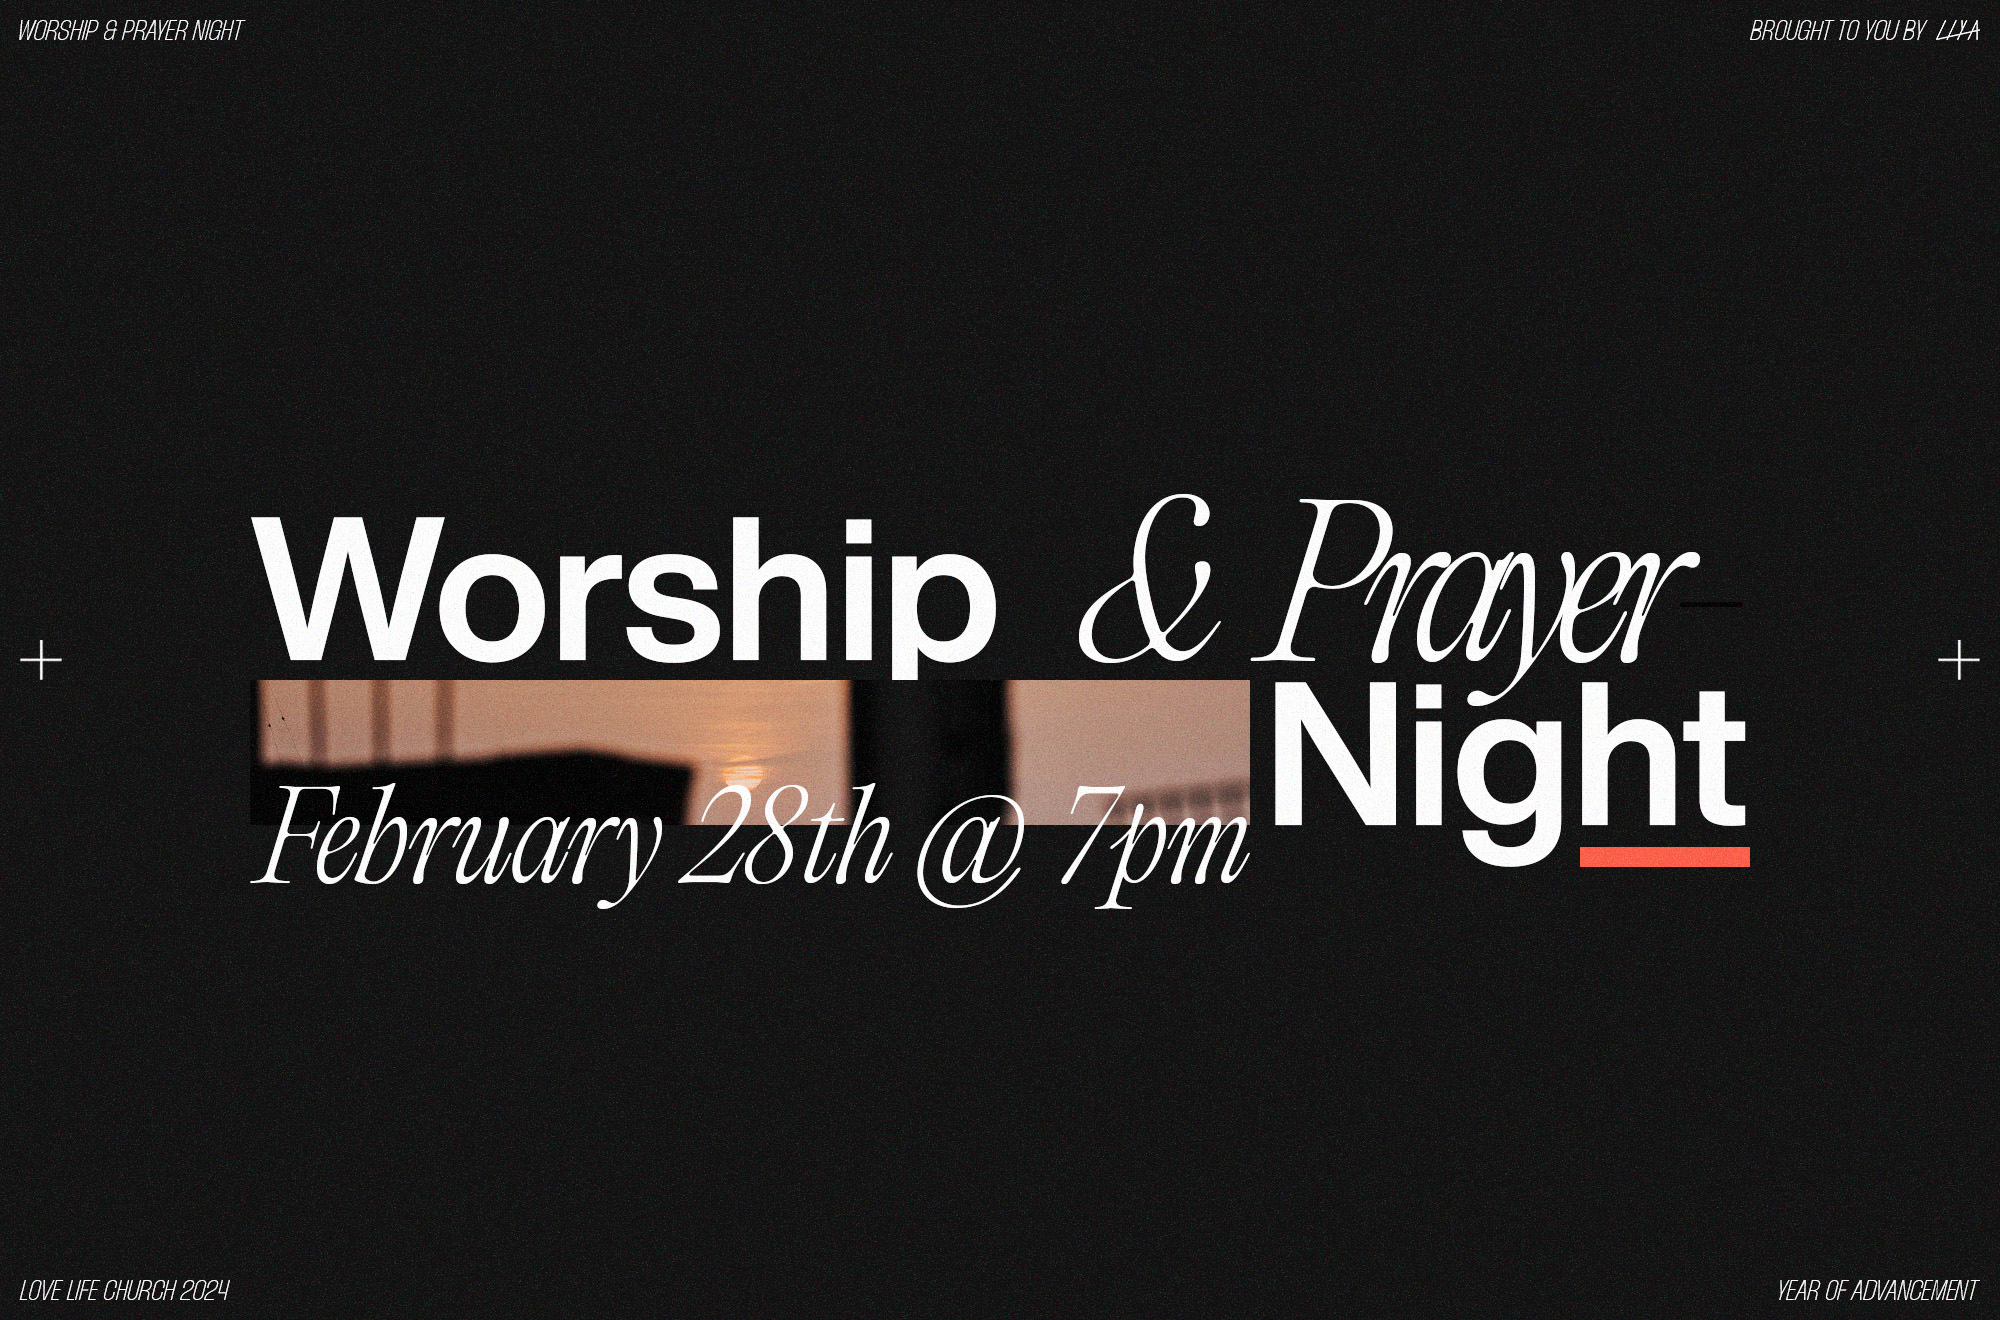 A night of worship and prayer | Wednesday Feb 28th @ 7pm